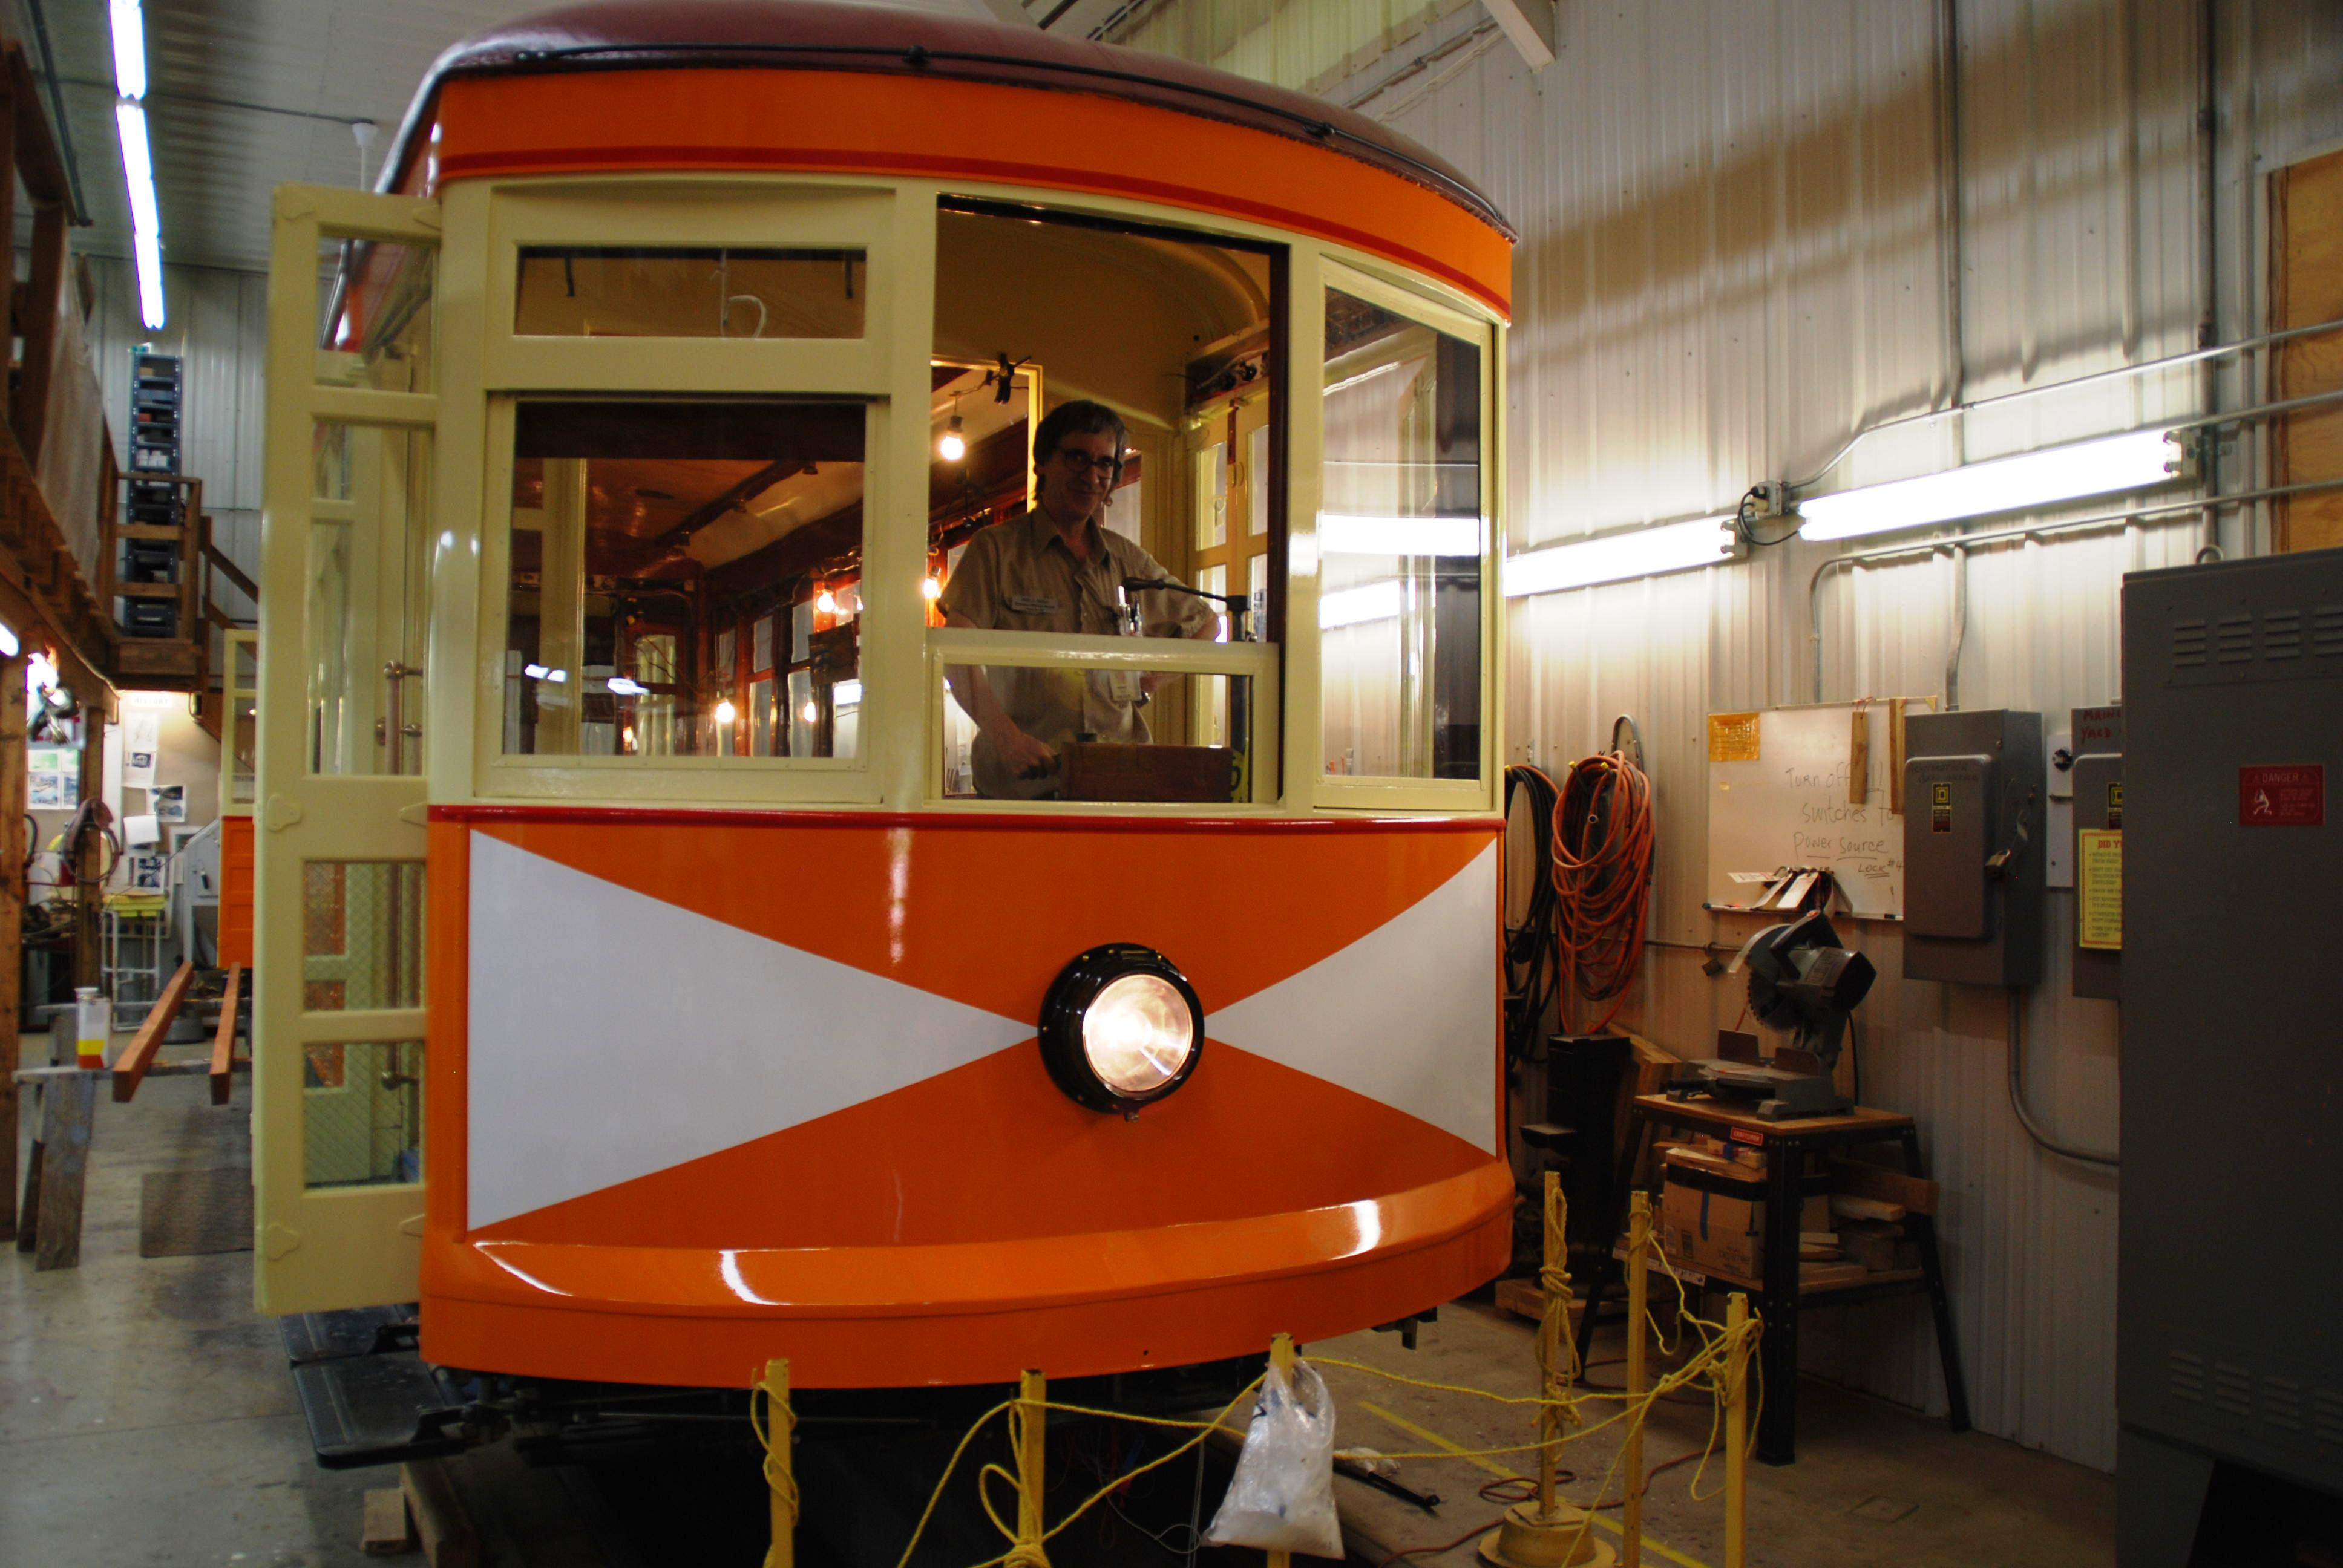 Signals Foreperson Mike Miller inside the Winona Streetcar No. 10 currently being restored in Excelsior.